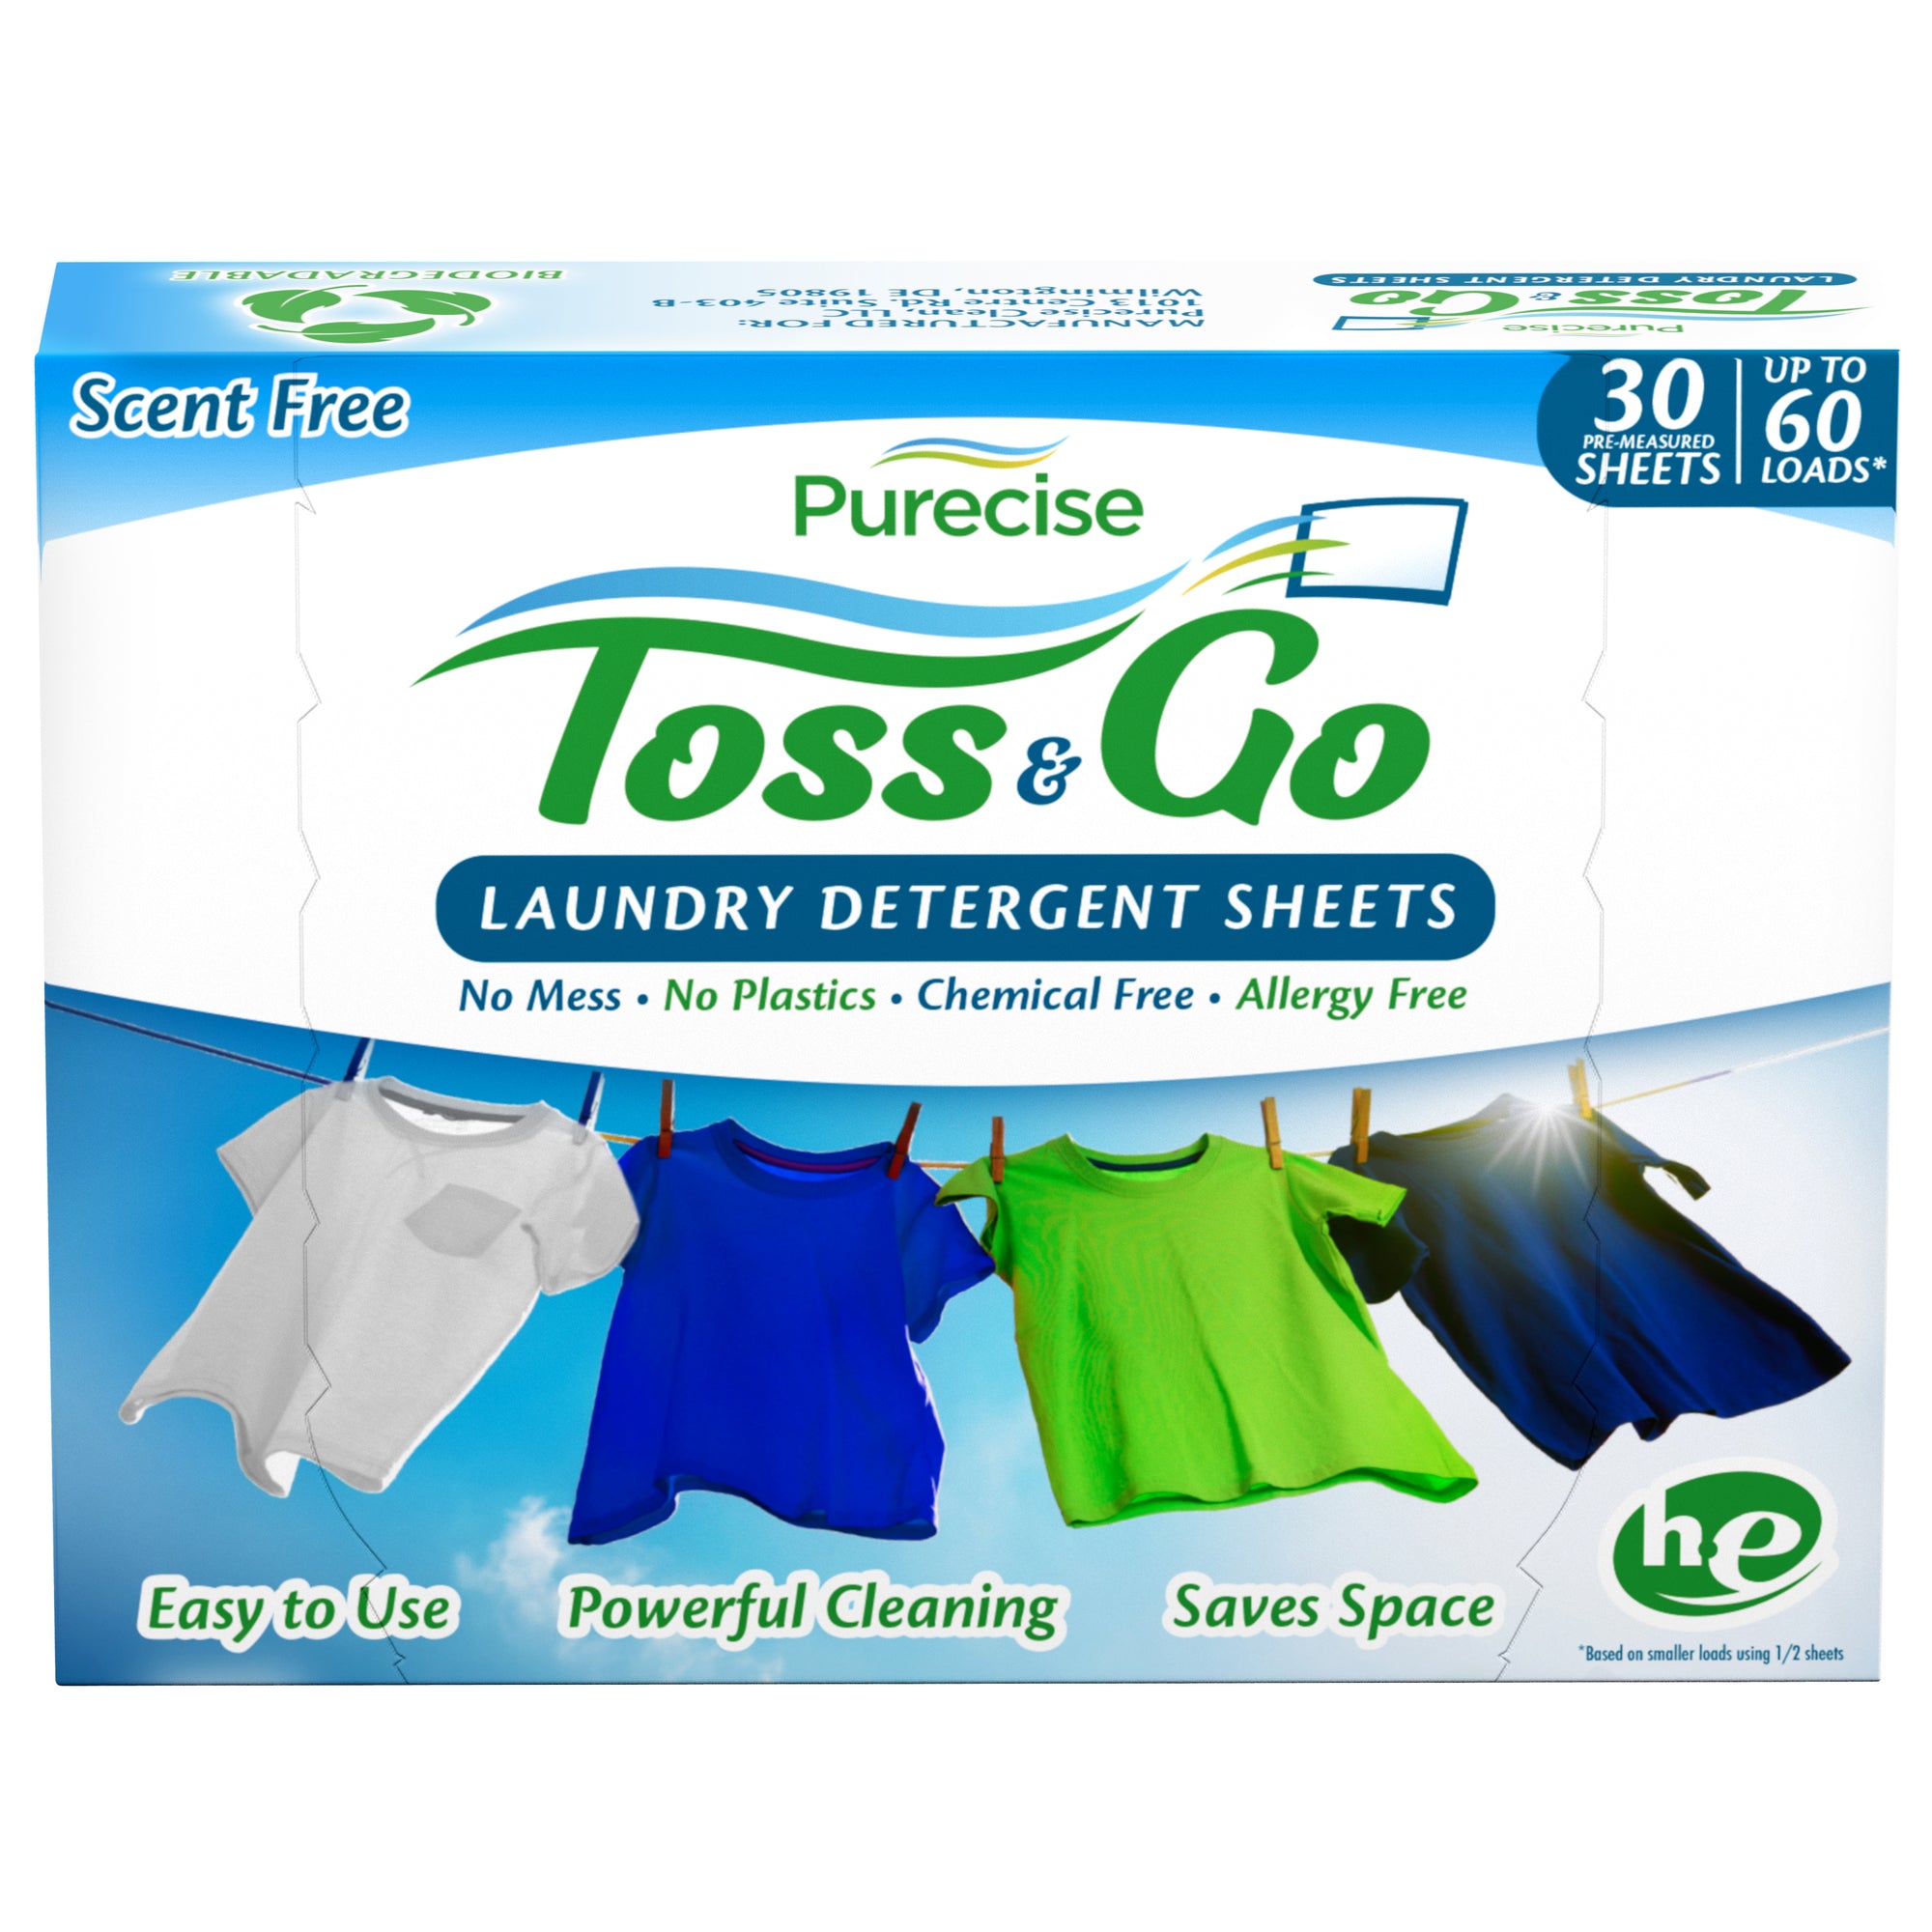 Toss & Go Laundry Detergent Sheets Box (Up To 60 Loads)